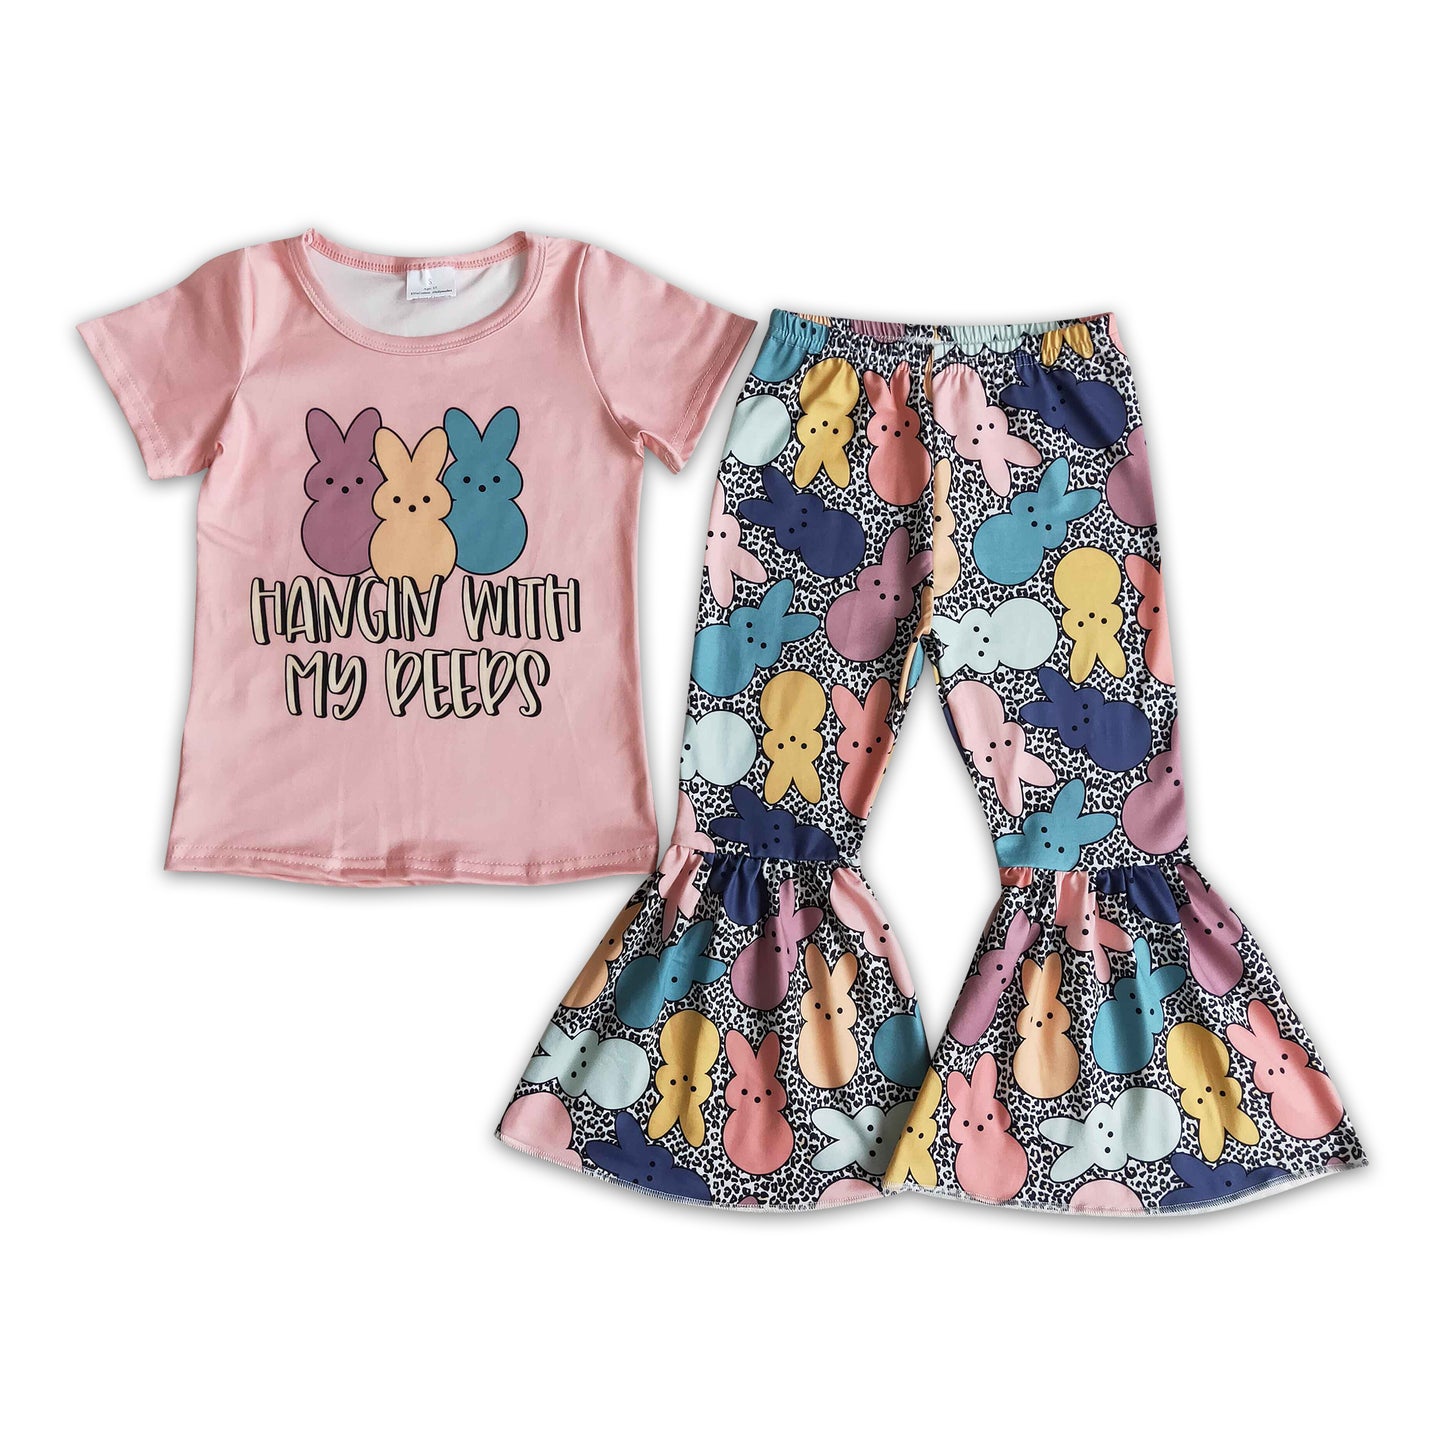 Hangin with my peeps shirt leopard pants girls easter clothing set